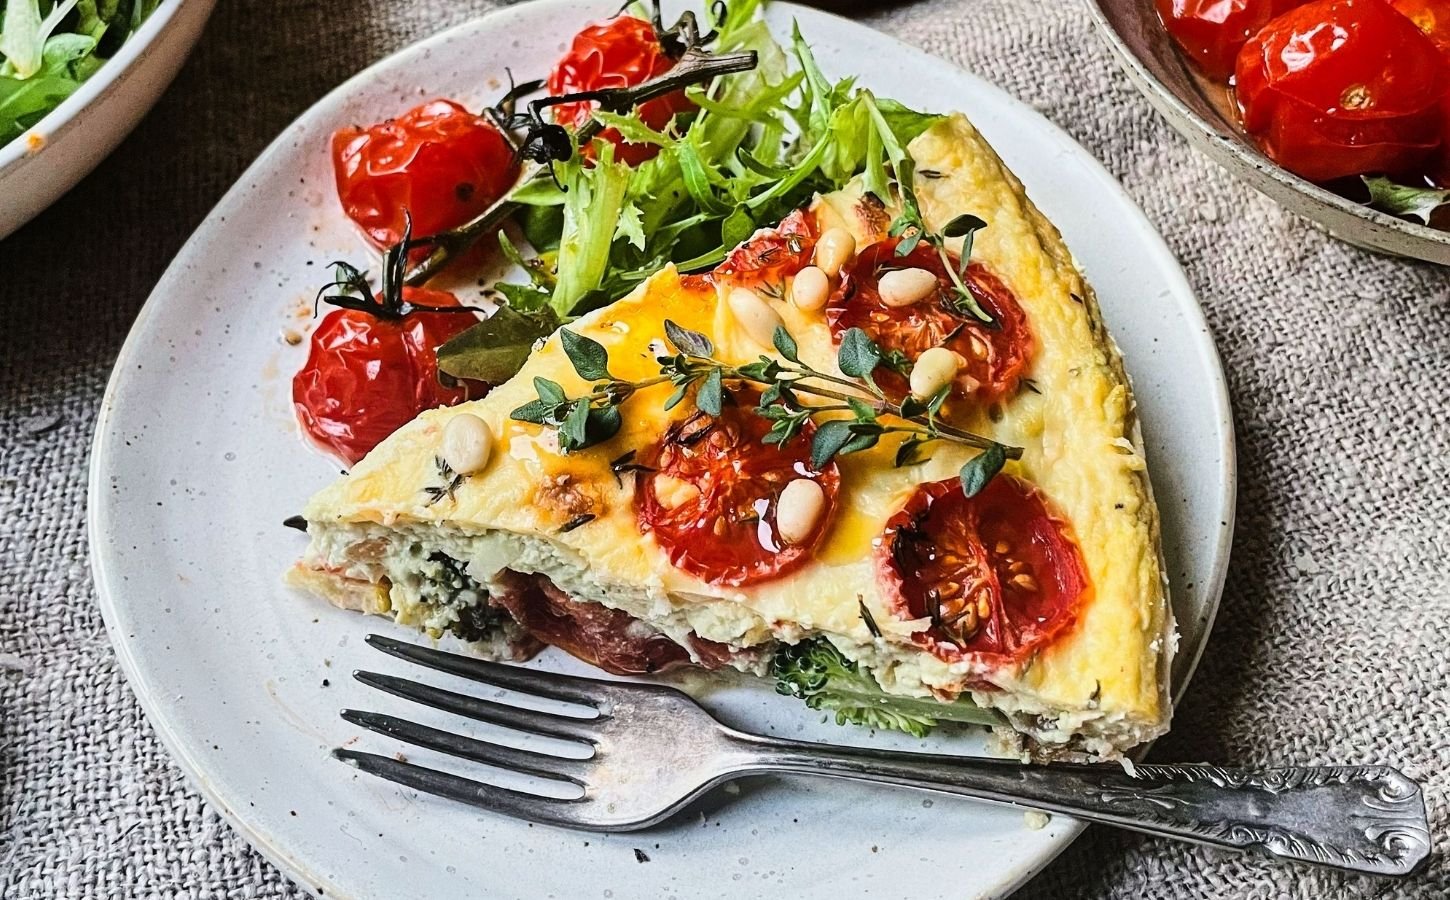 A vegan cheese and tomato quiche made with dairy-free ingredients